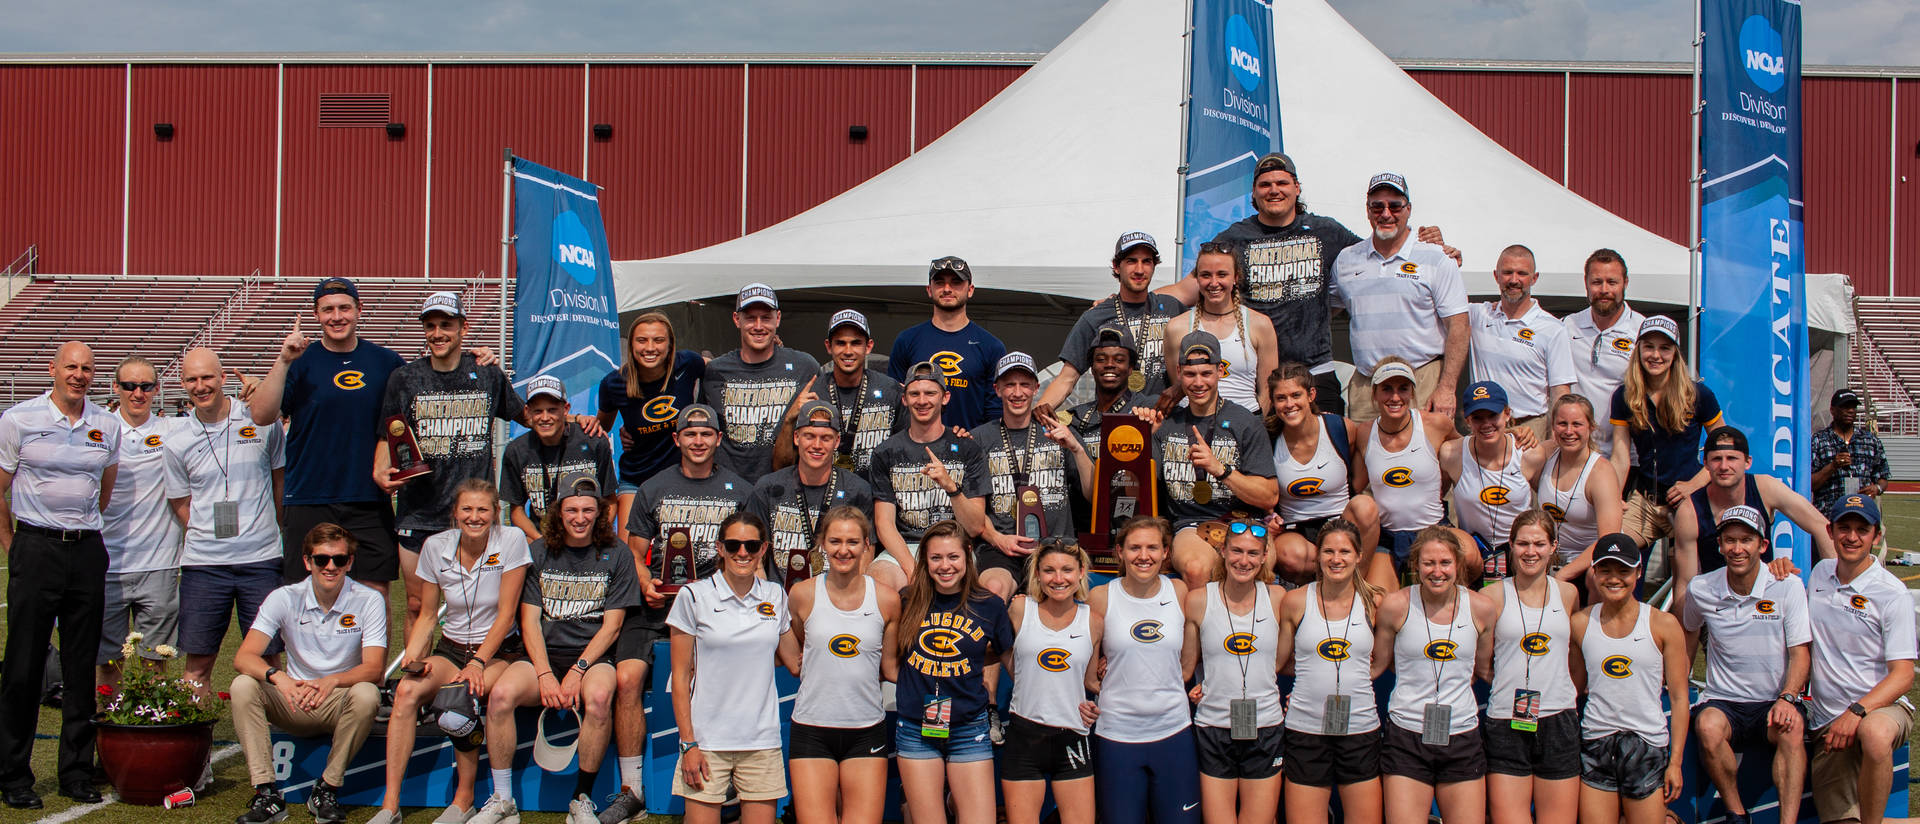 Blugold track and field team, nationals 